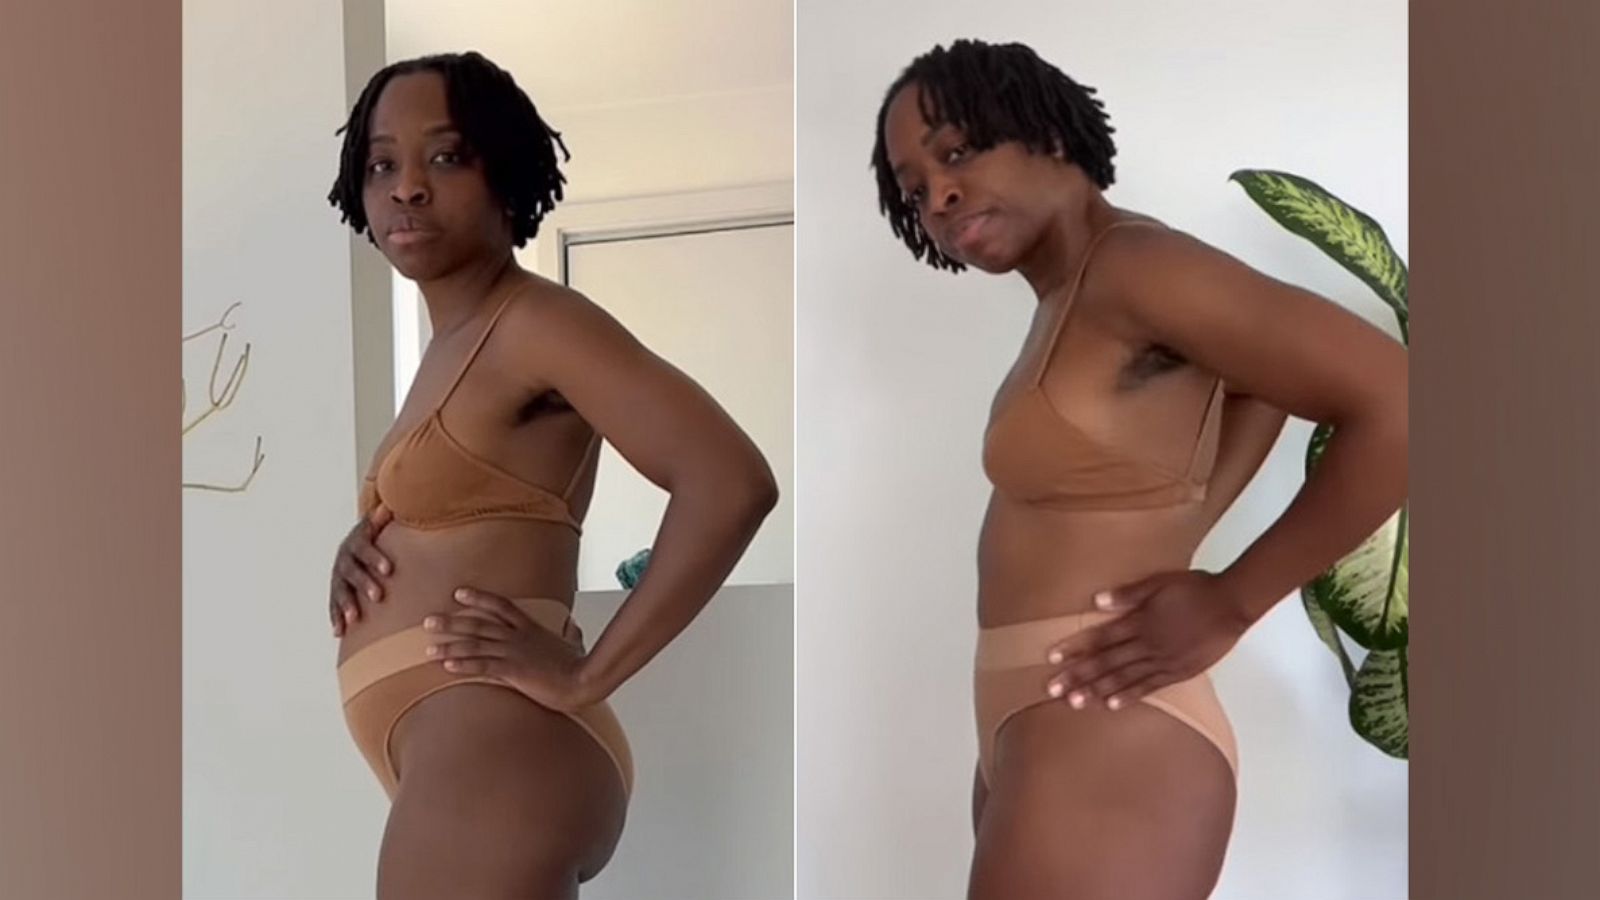 Woman has uterine fibroids removed that equaled the size of a 6-month pregnancy photo